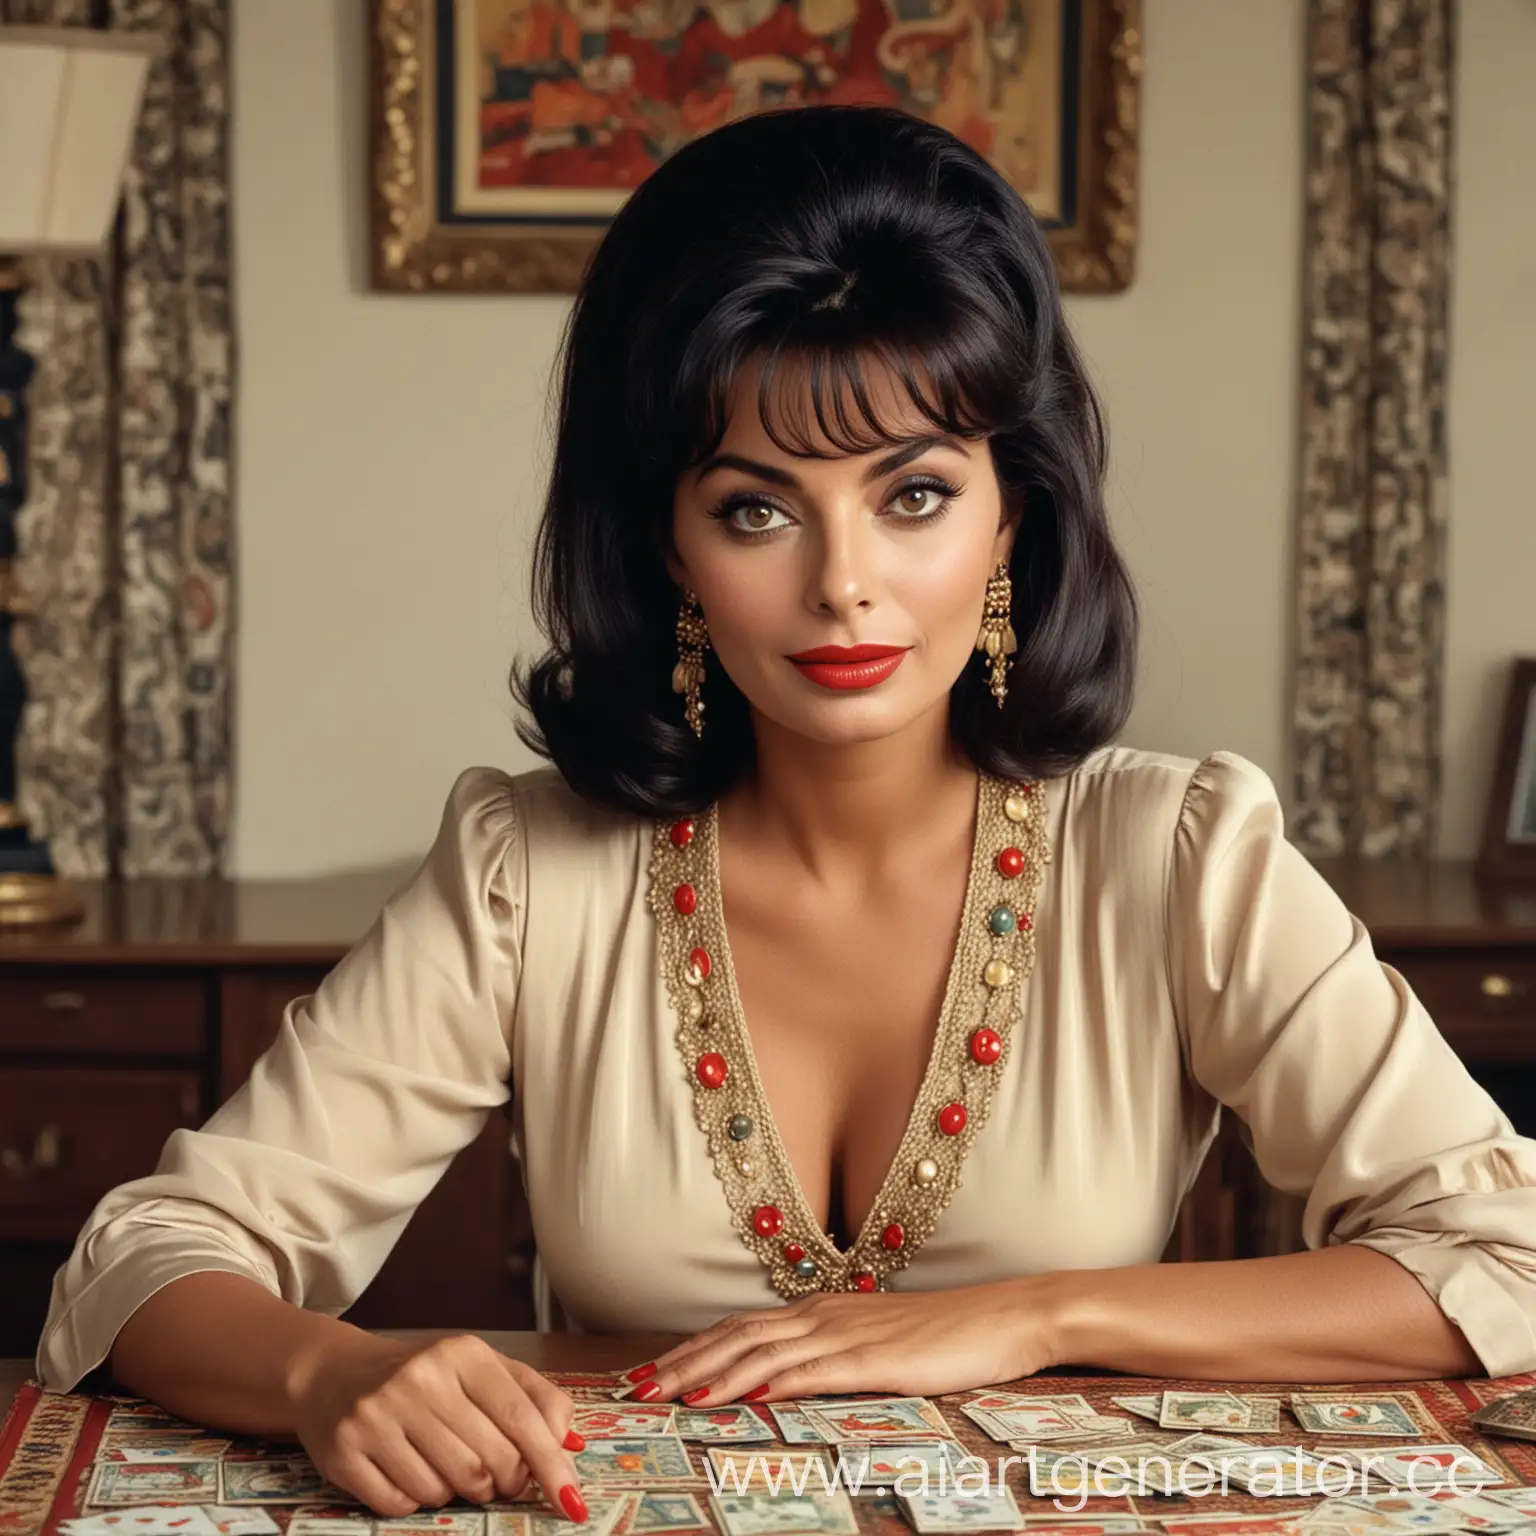 Fortune-Telling-with-Tarot-Cards-by-Sofia-Loren-in-Beige-Blouse